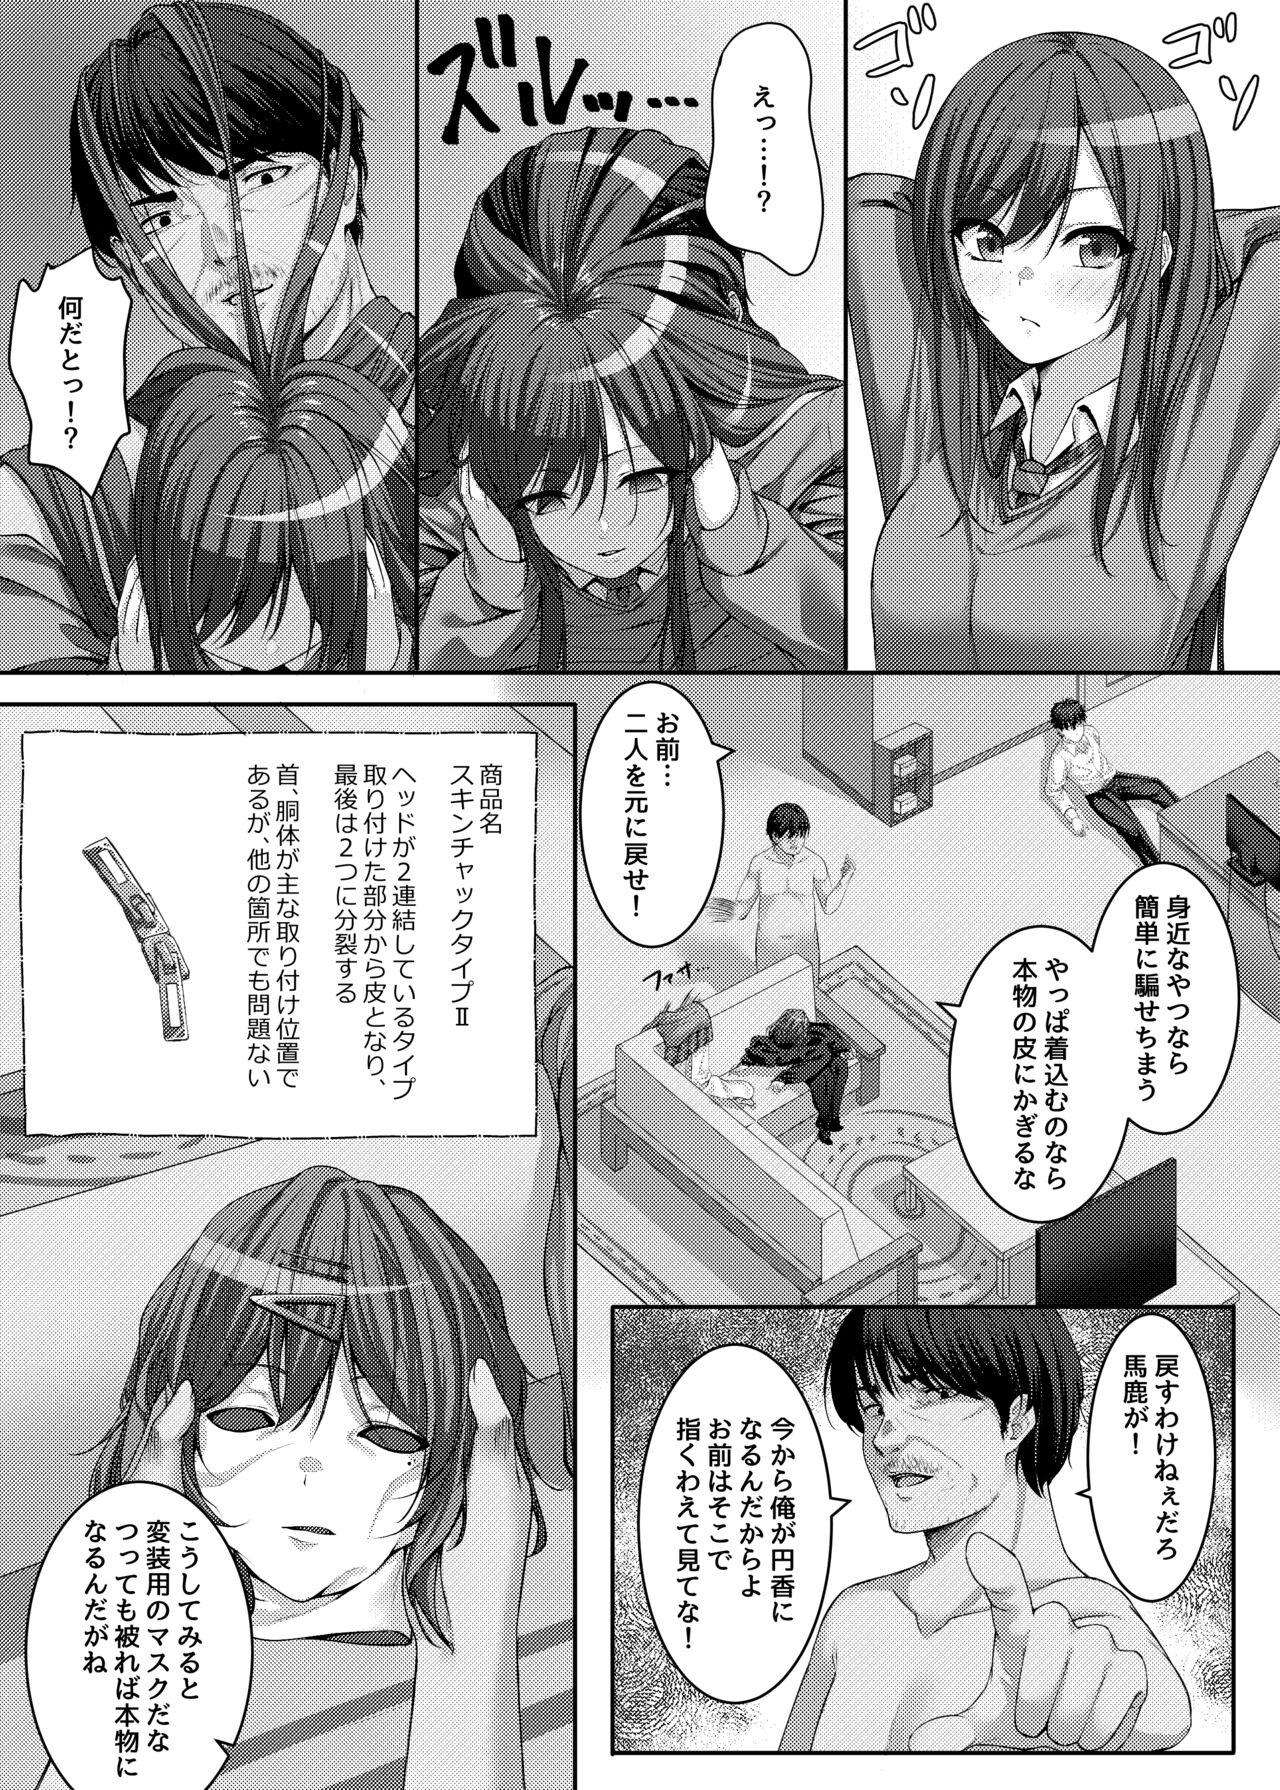 Family Taboo 移り皮り～円香編～ - The idolmaster Chinese - Page 3